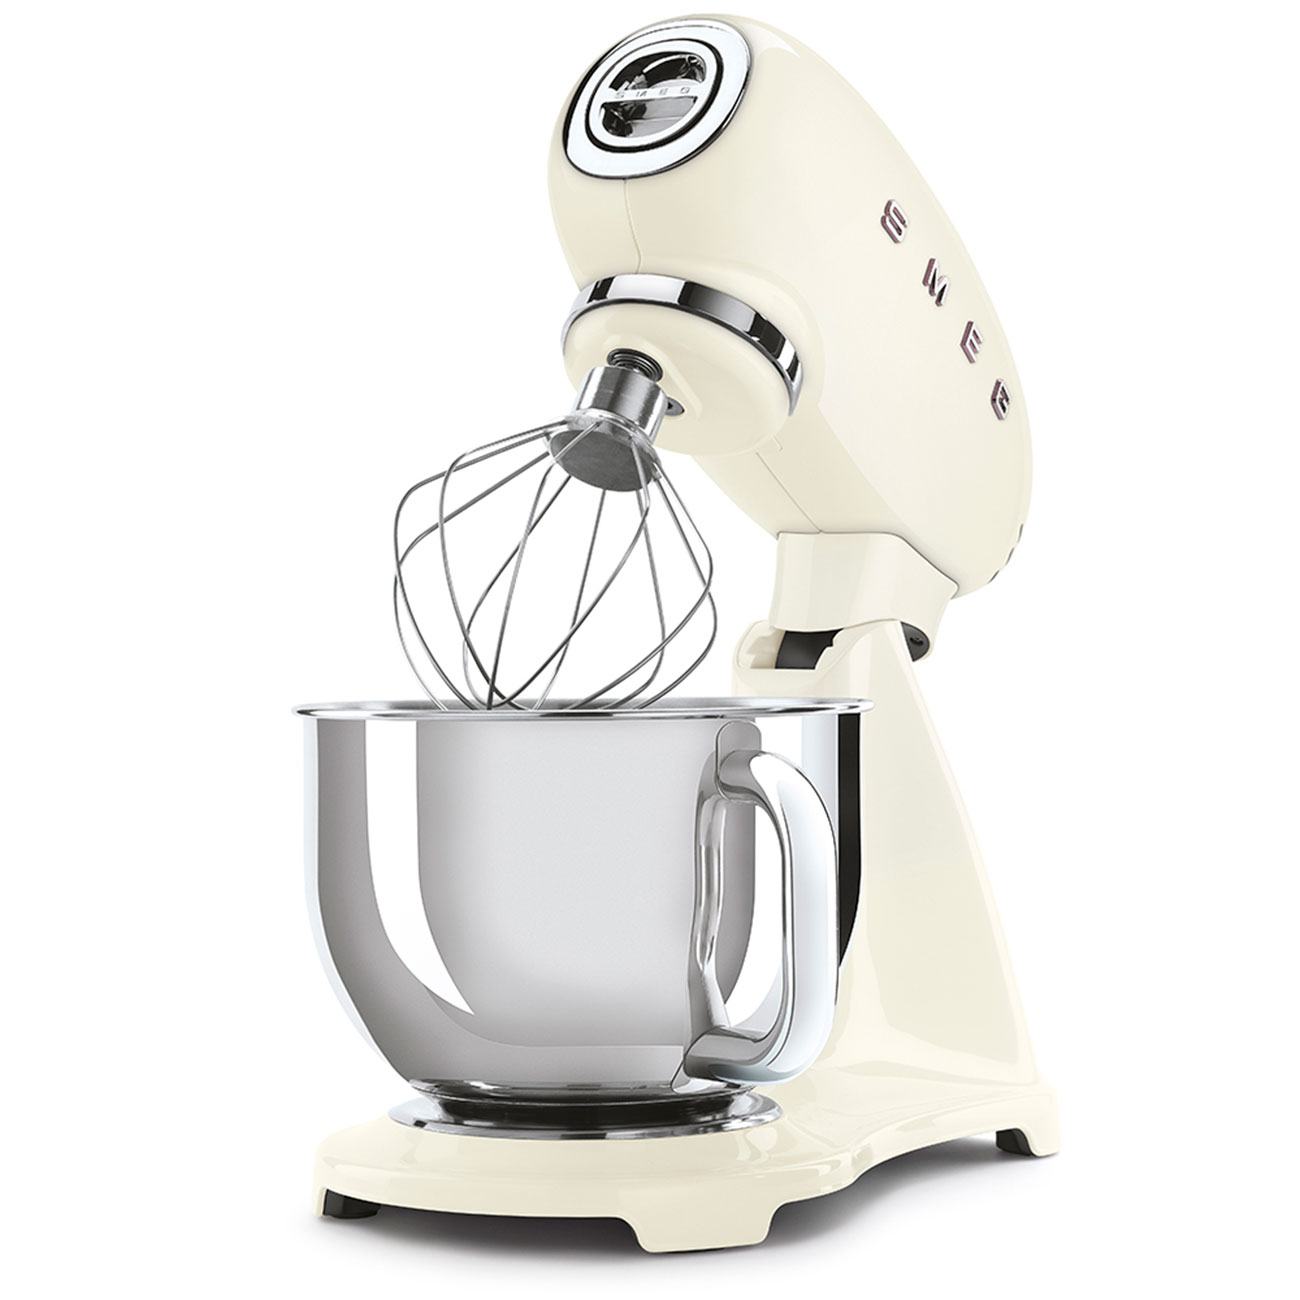 Cream Food Mixer with 4.8l stainless steel bowl - SMF03CRUK_2